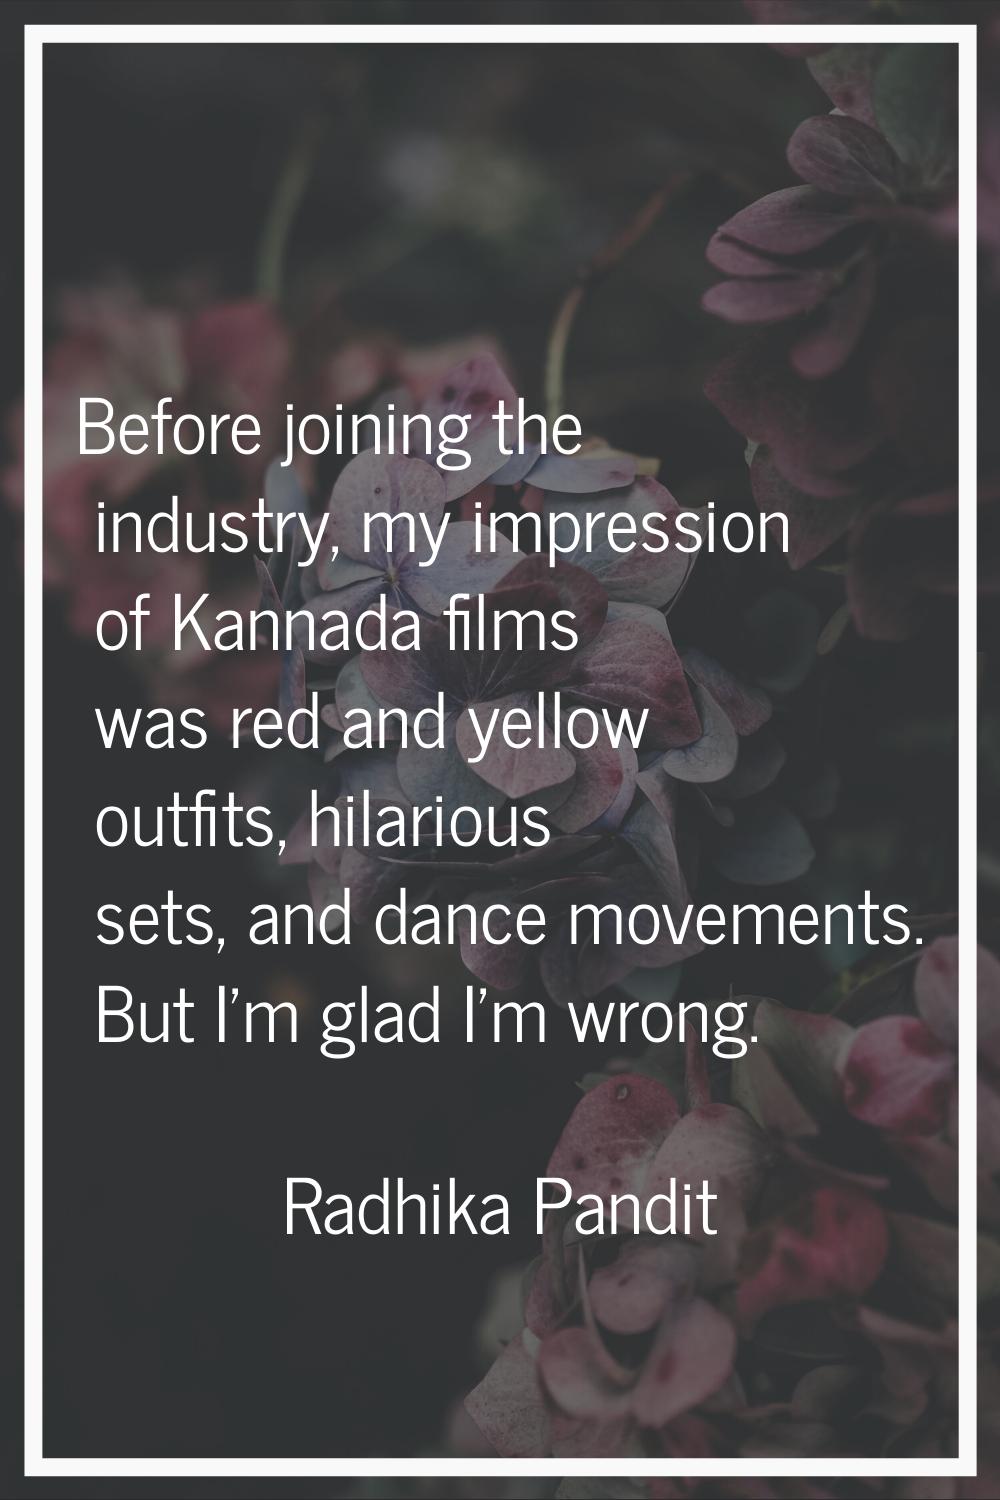 Before joining the industry, my impression of Kannada films was red and yellow outfits, hilarious s